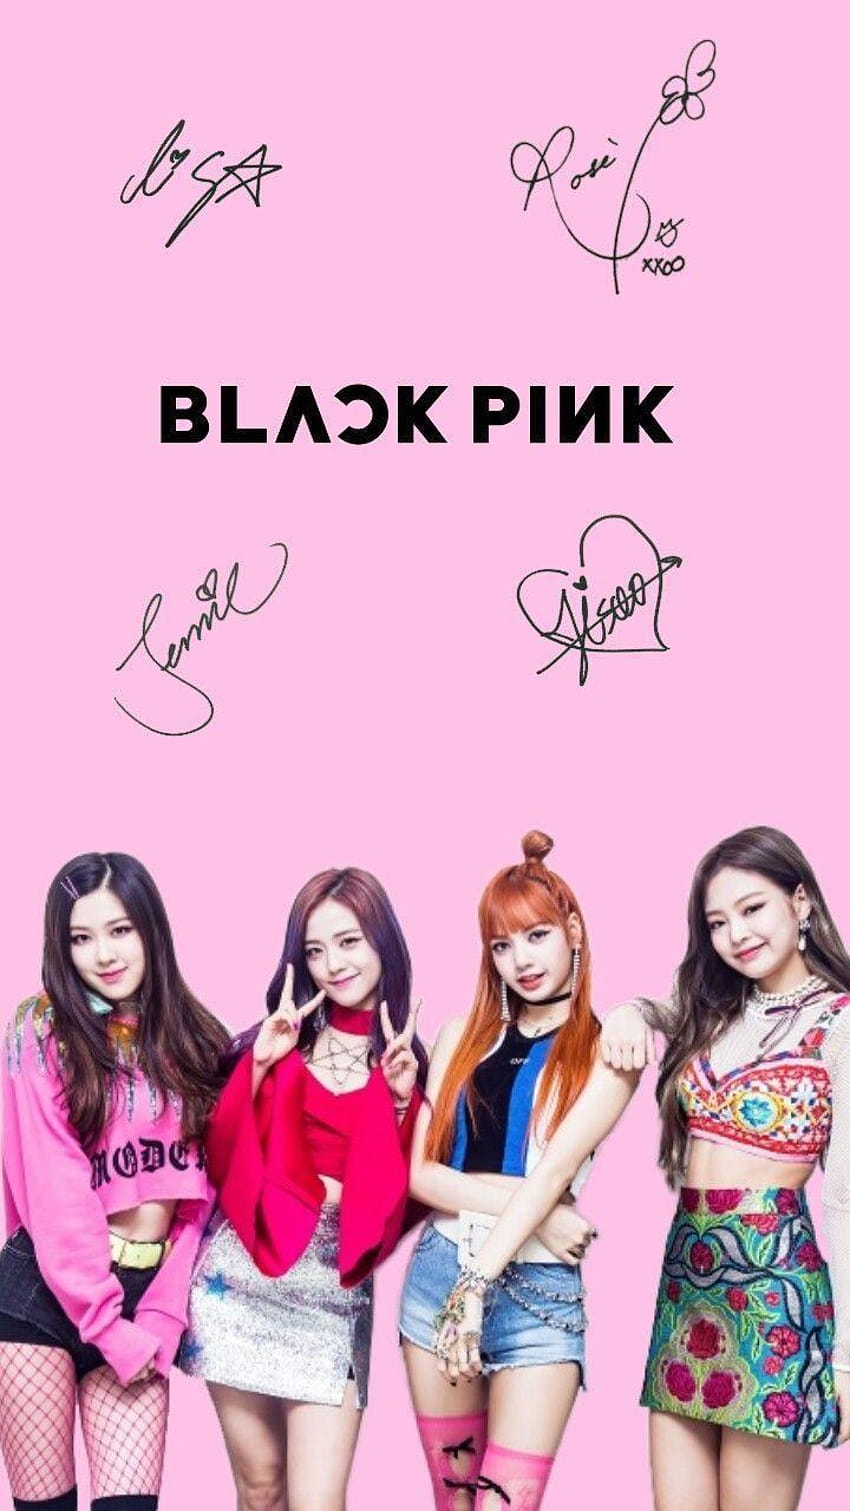 Blackpink U 2019 for Android, blackpink in your area HD phone wallpaper